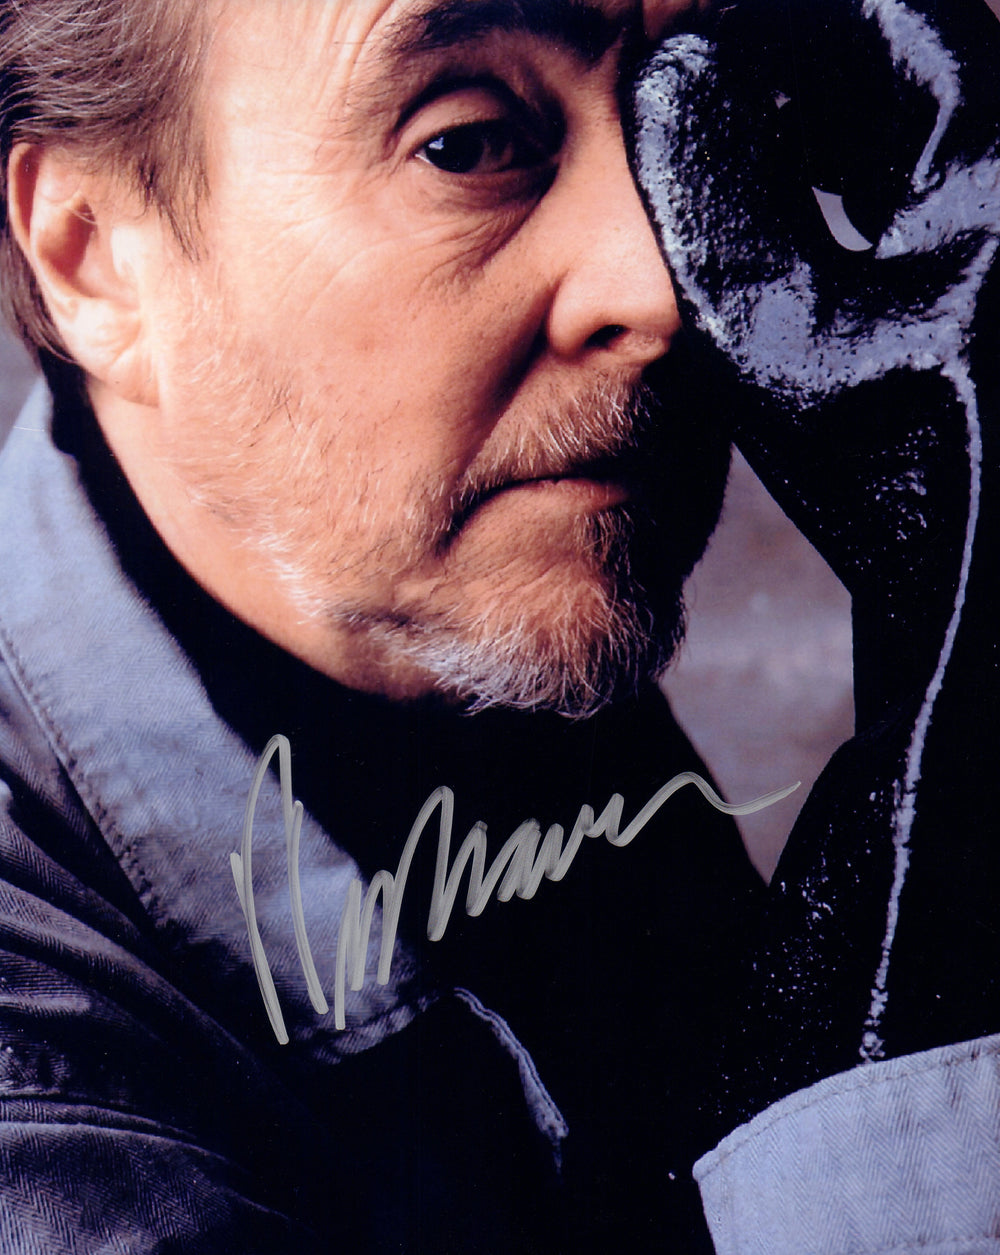 Wes Craven Horror Creator / Director of A Nightmare on Elm Street & Scream Signed 8x10 Photo